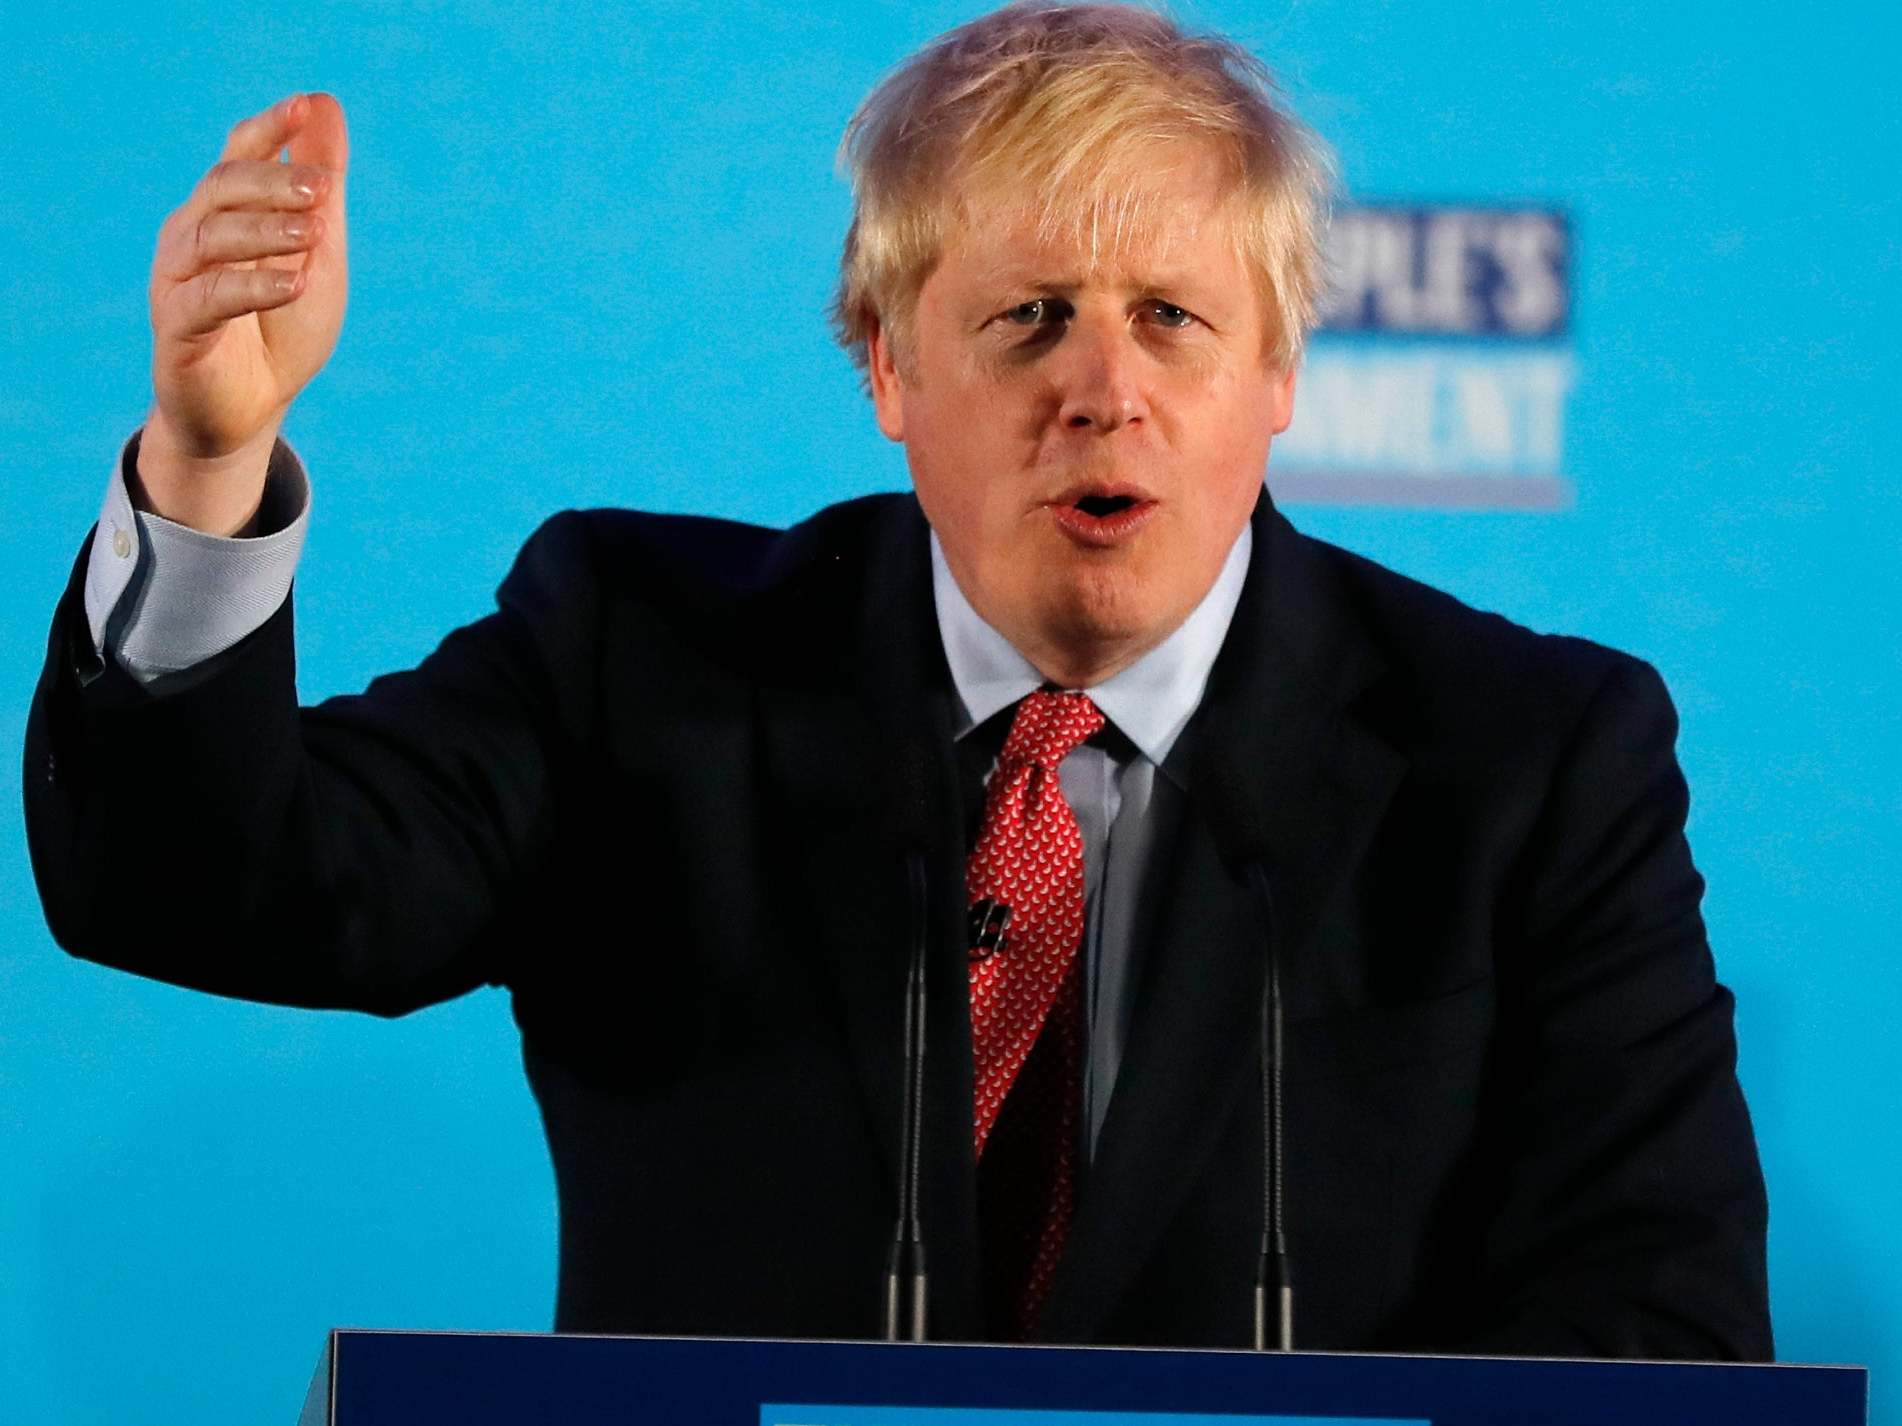 Related video: Boris Johnson promises to focus on the NHS and Brexit after winning majority